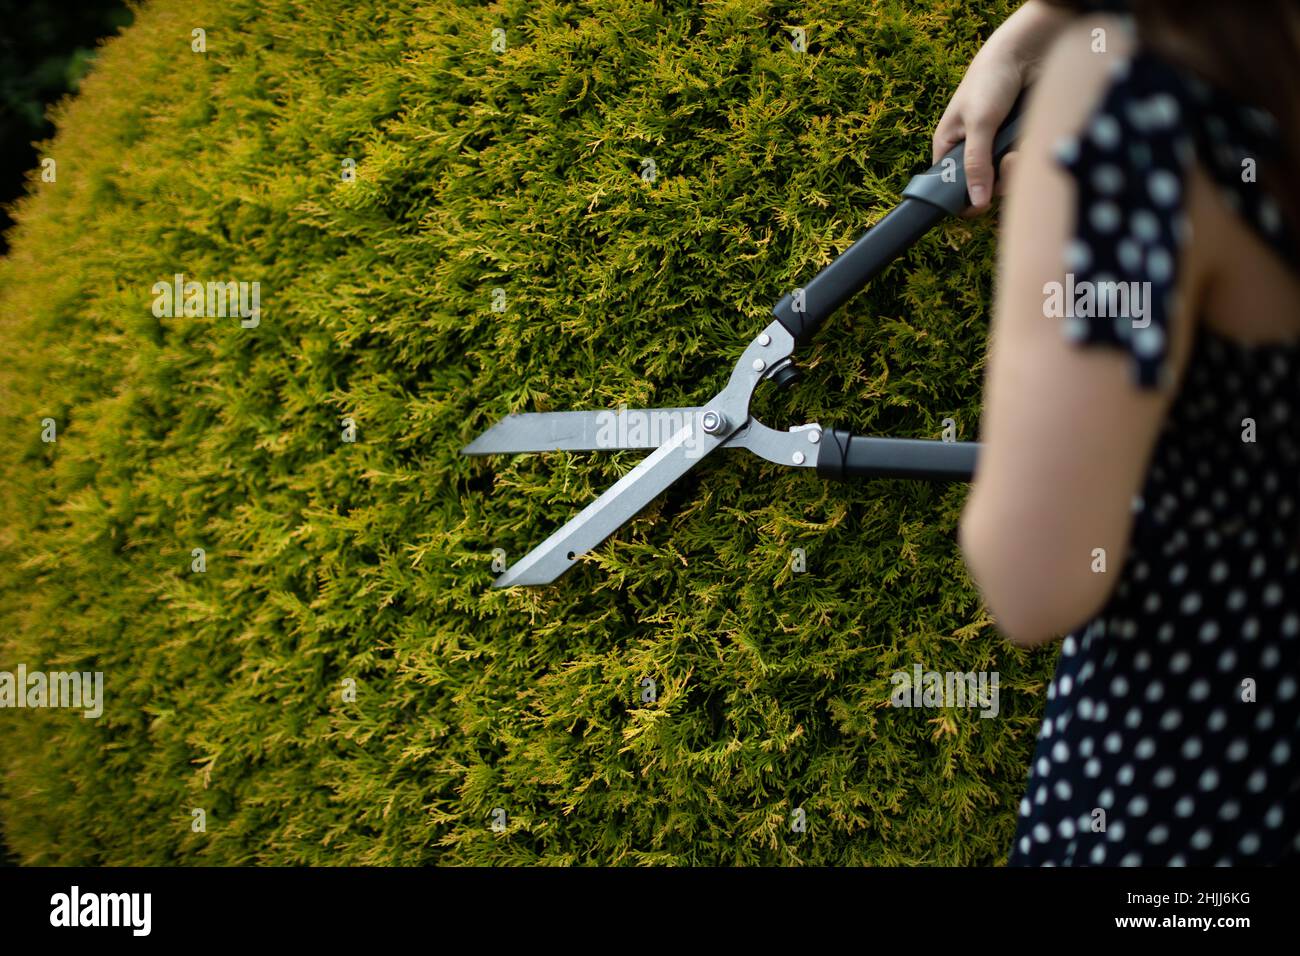 A woman cuts thuja tree branches with garden shears. Stock Photo